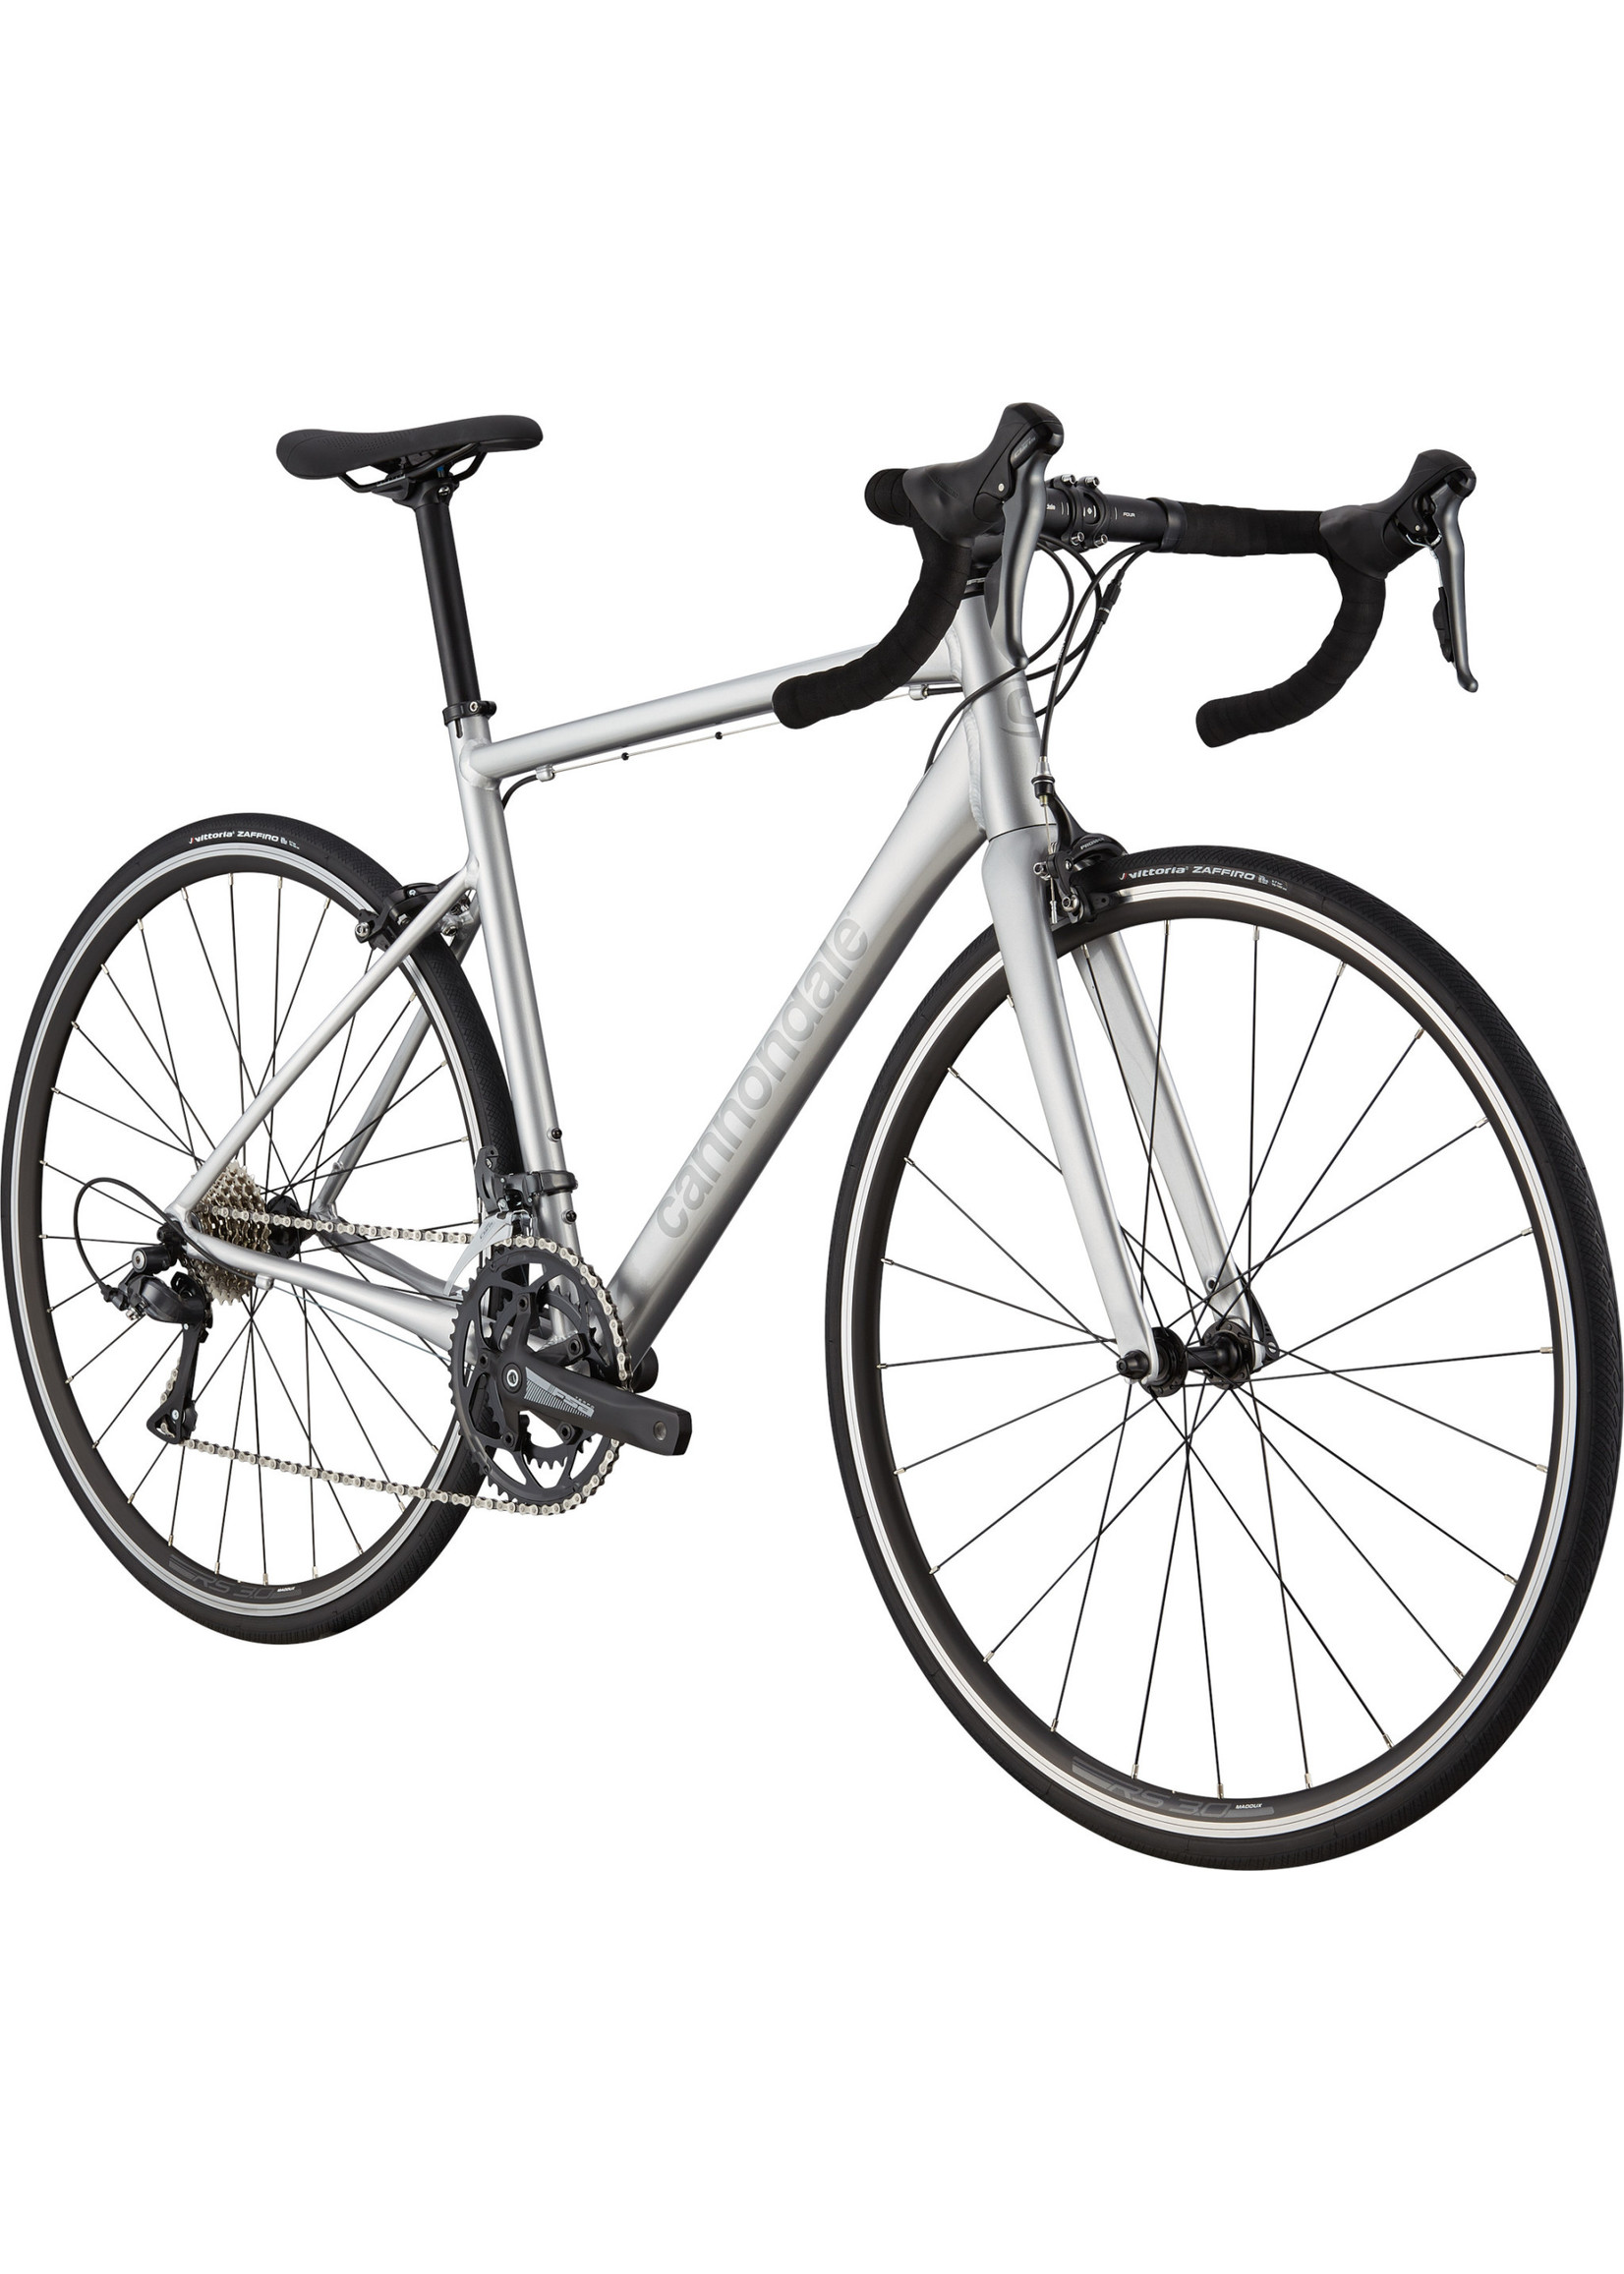 Cannondale Cannondale Optimo 4 M 54 Silver 700c